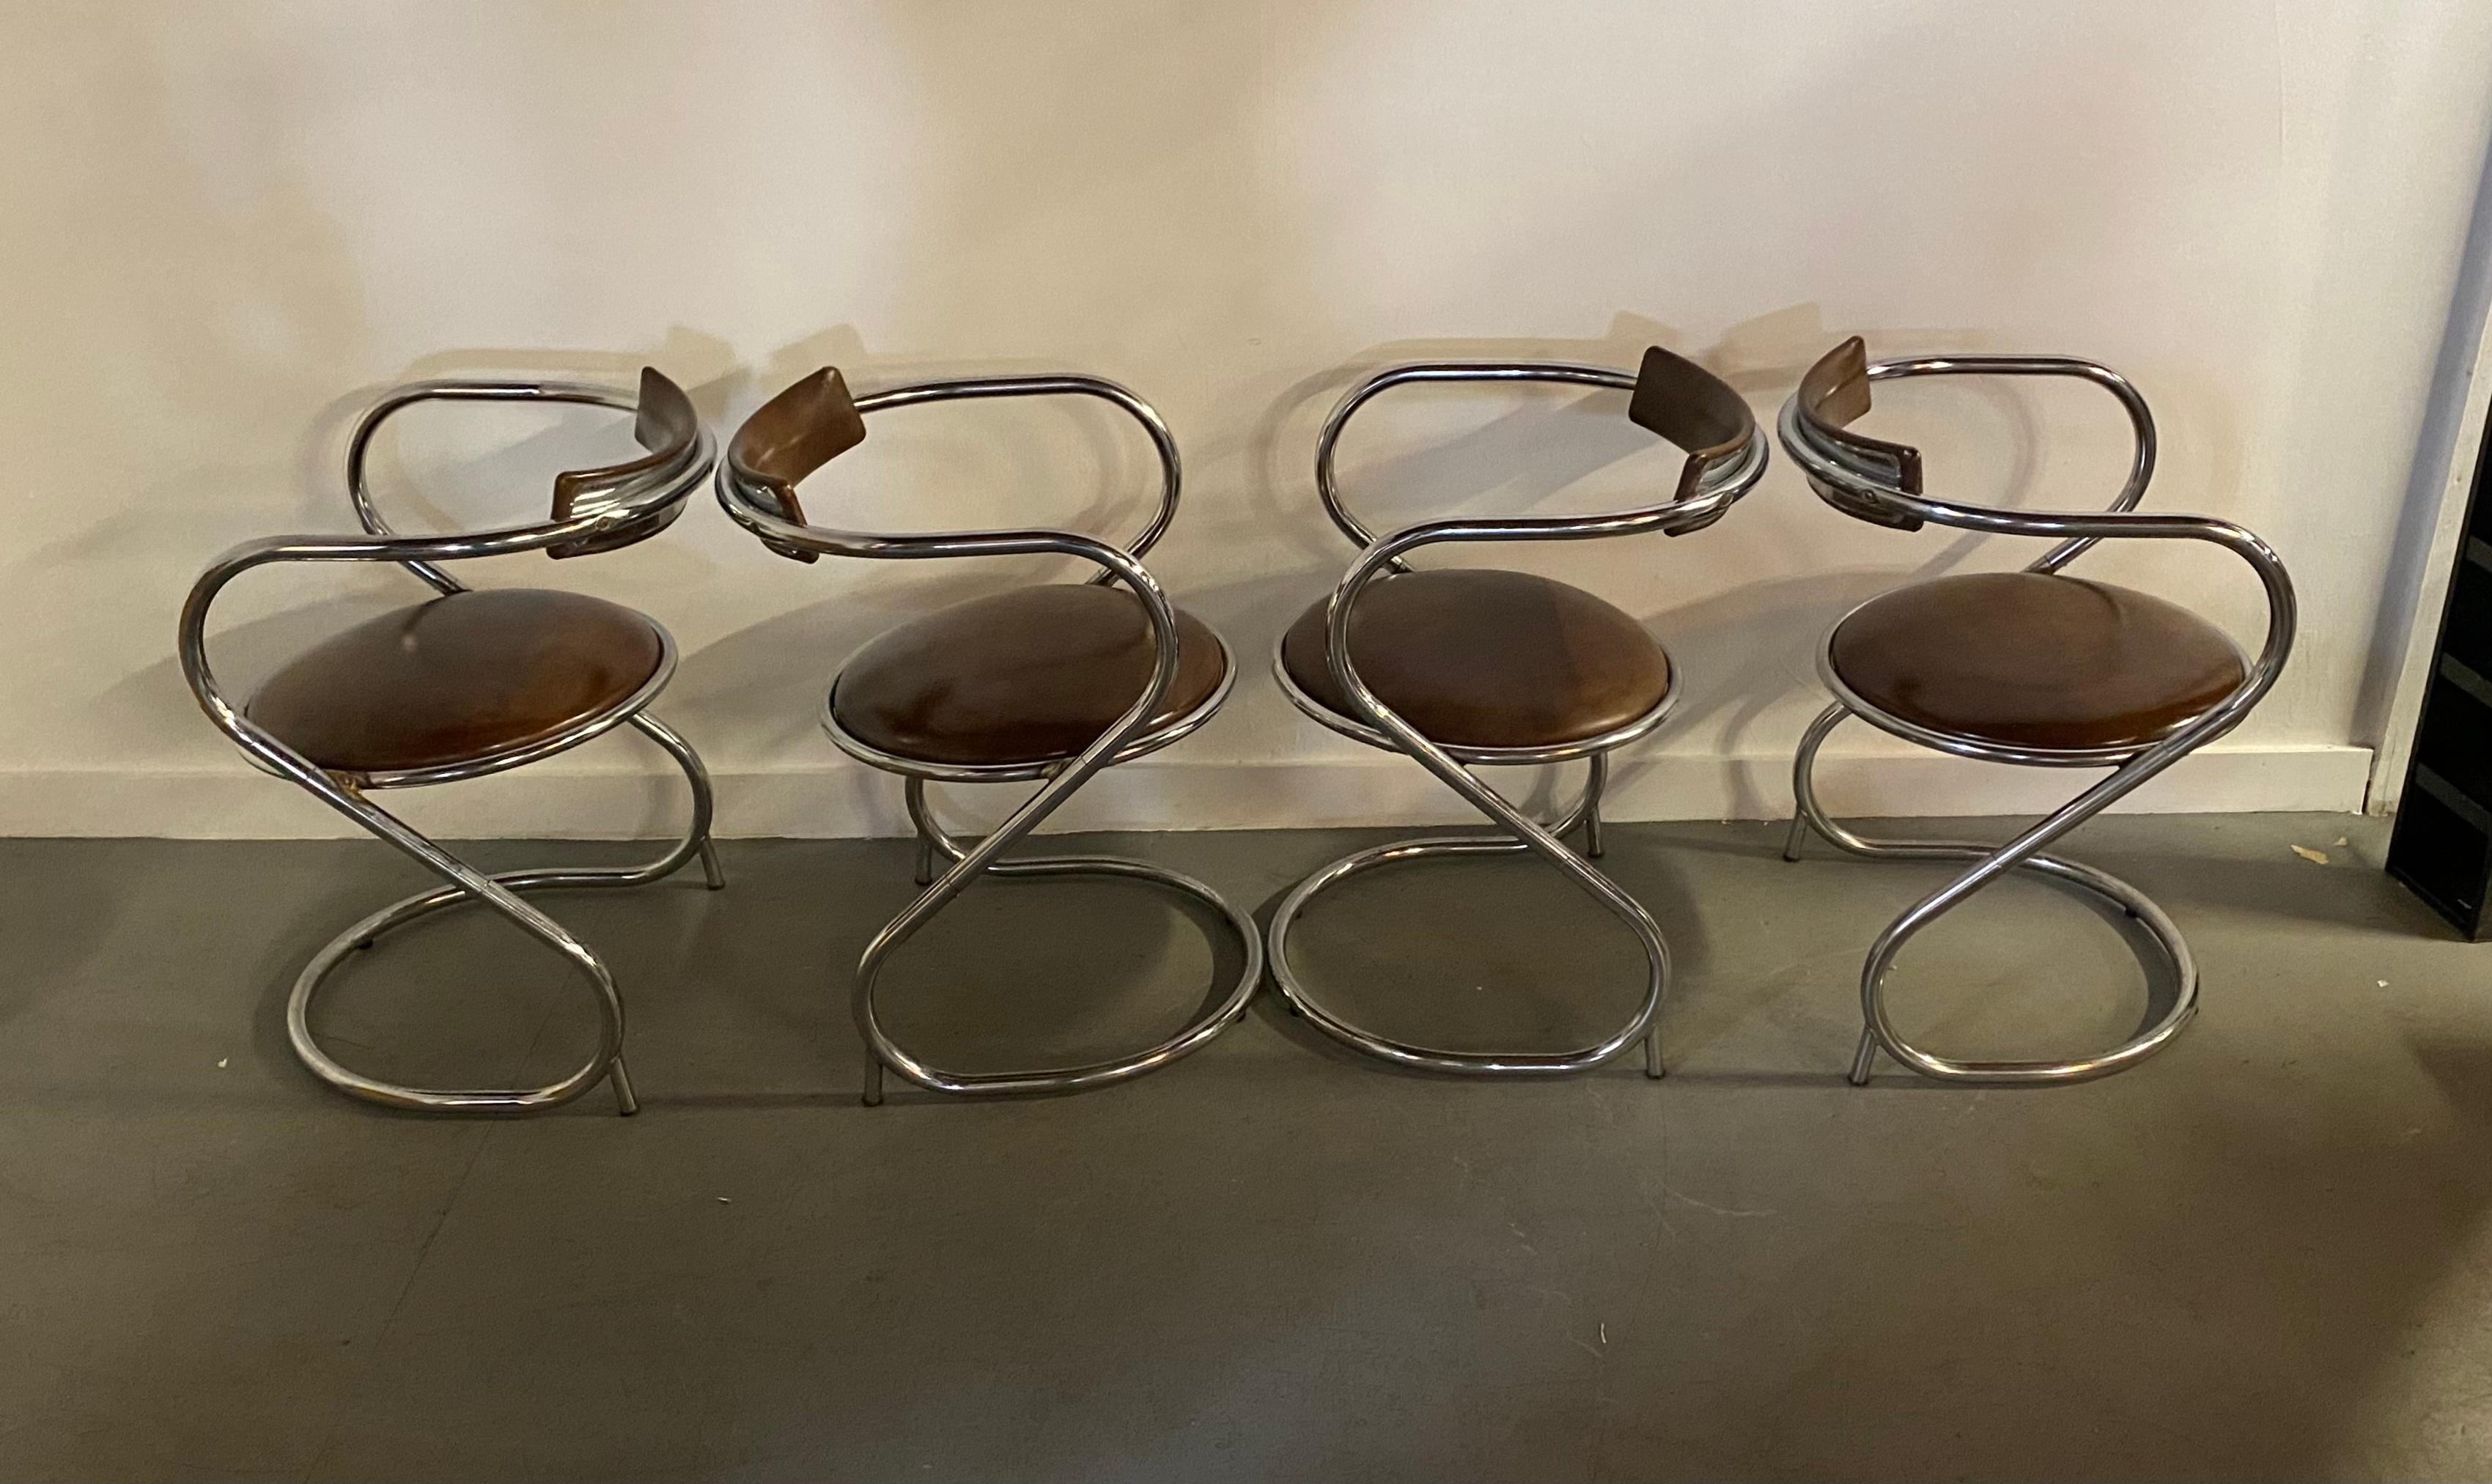 rim chairs for sale